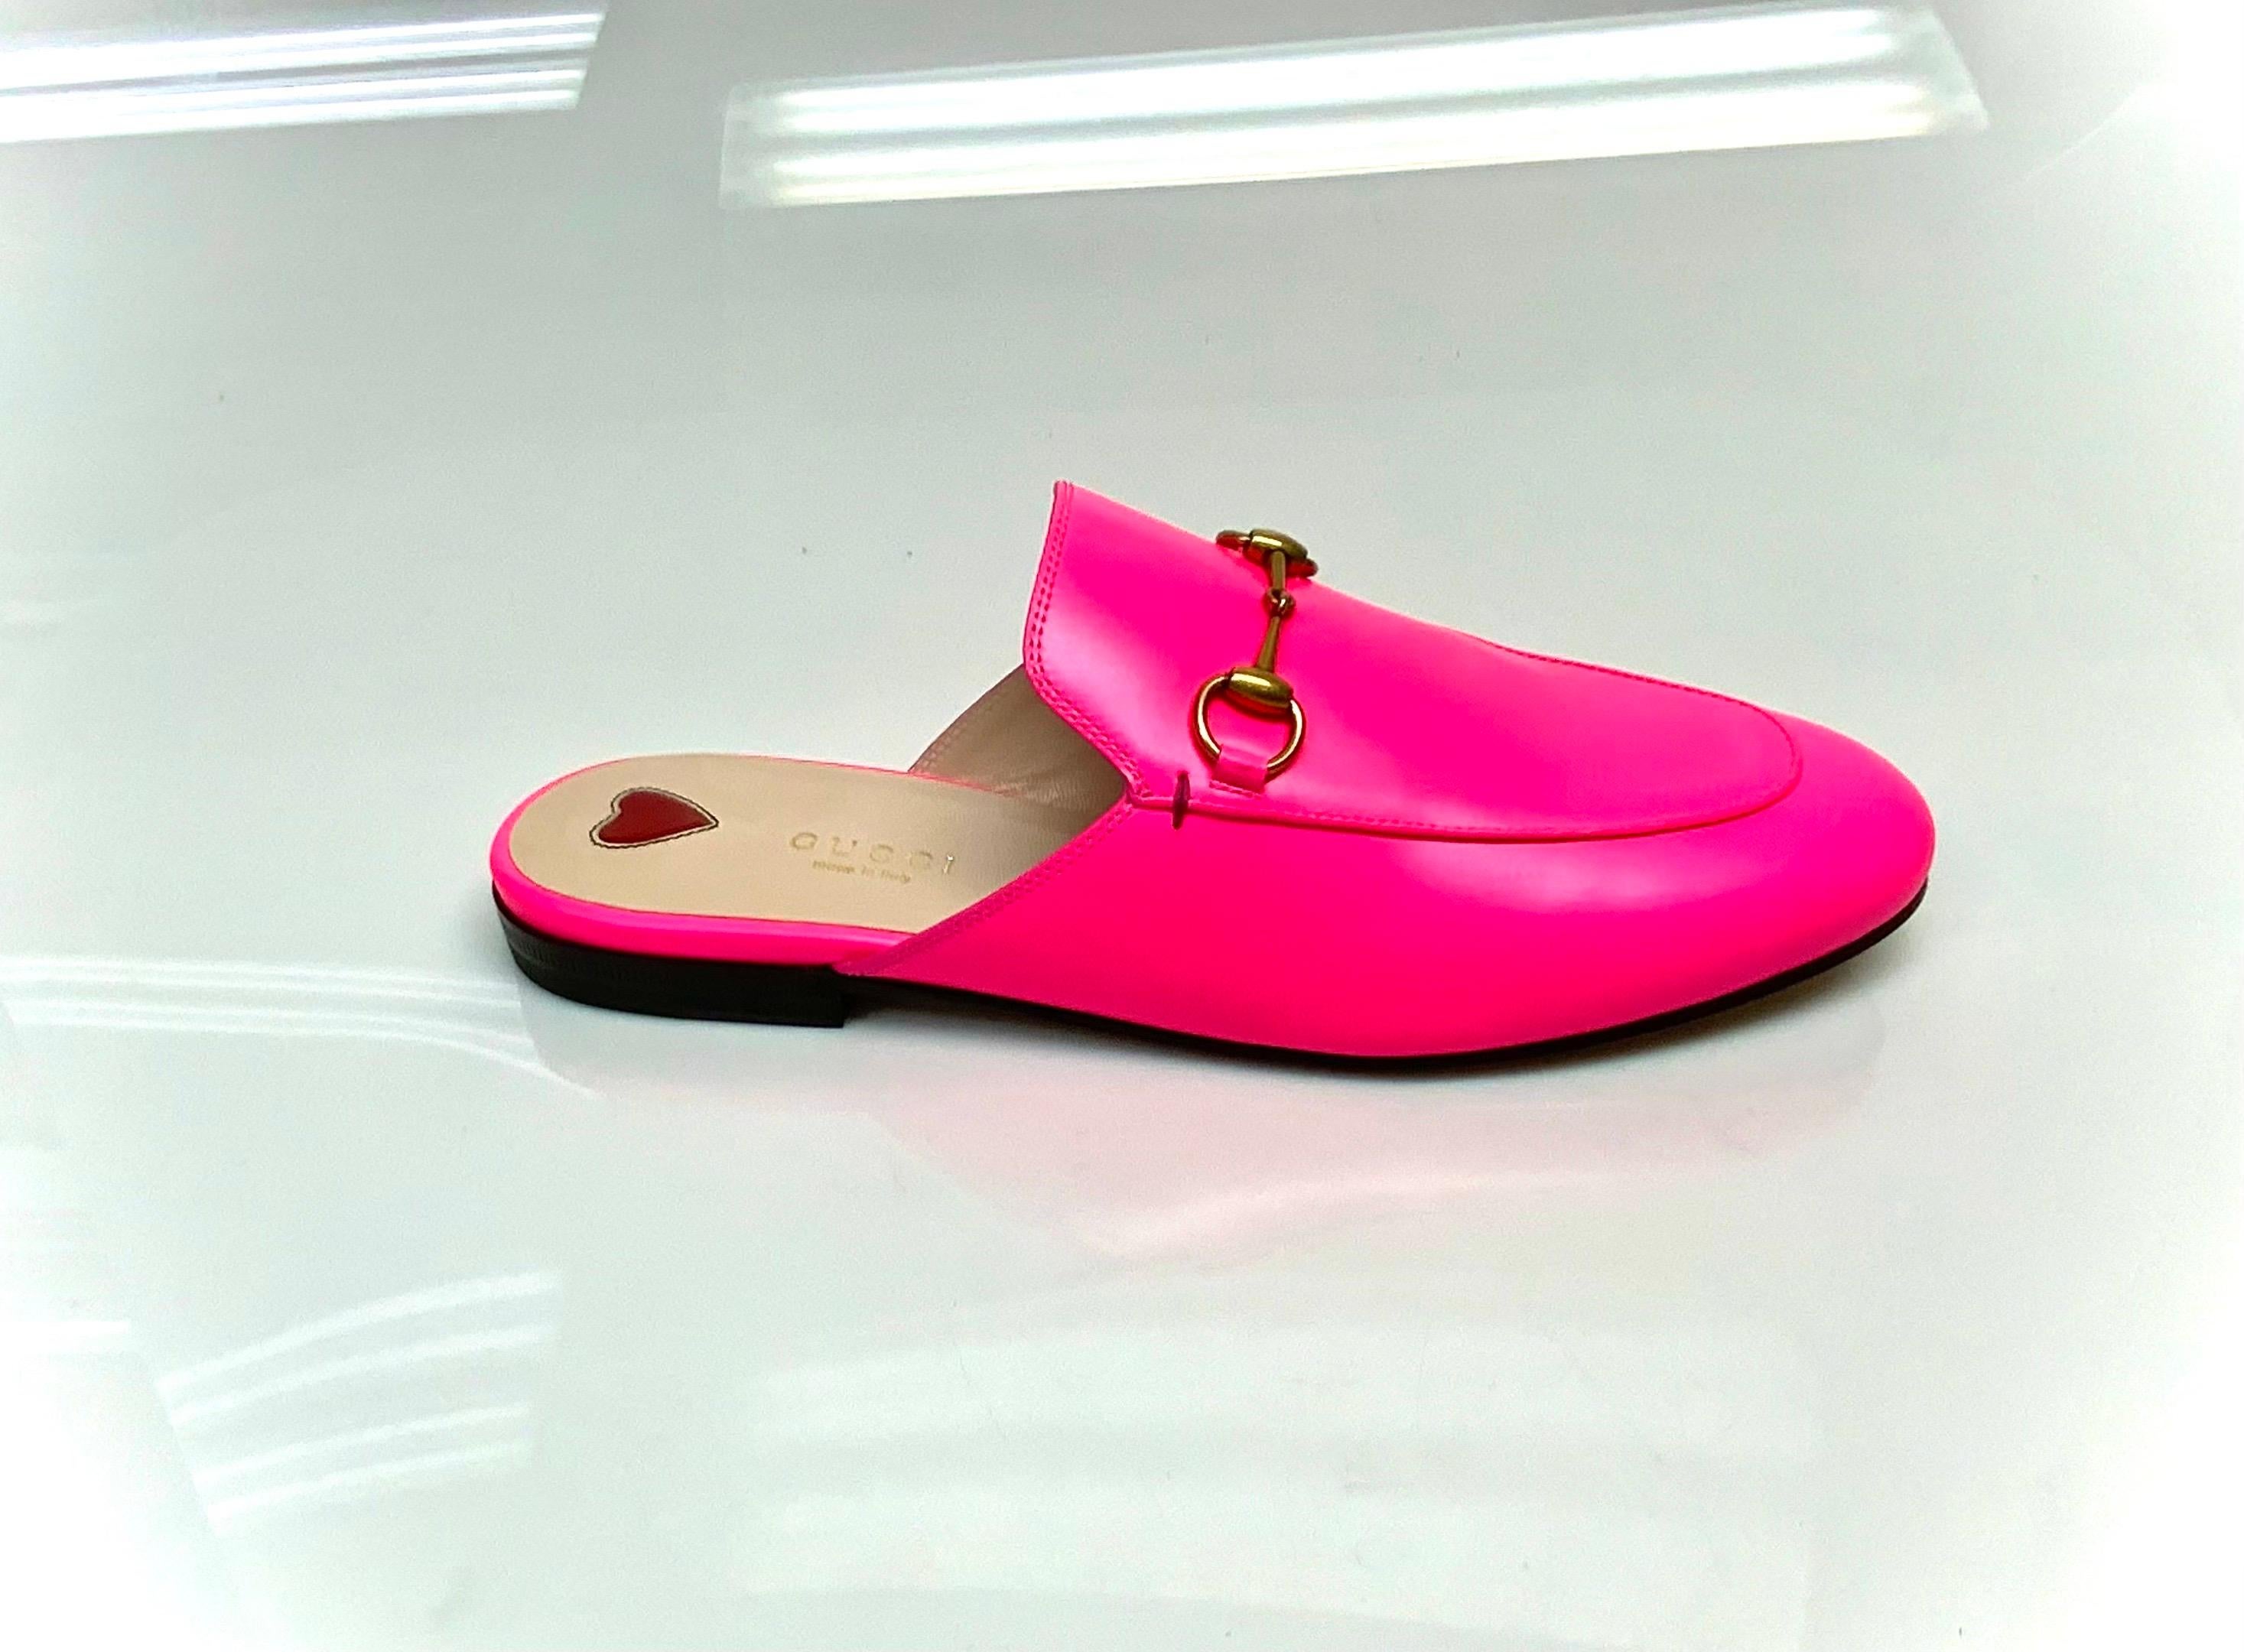 These chic loafers are crafted of smooth neon pink calfskin leather. They feature an aged gold horse bit embellishment, a rounded toe, and a 0.5 inch heel. The Gucci princetown slides will be staple in anyone's closet. This item is NEW and NEVER